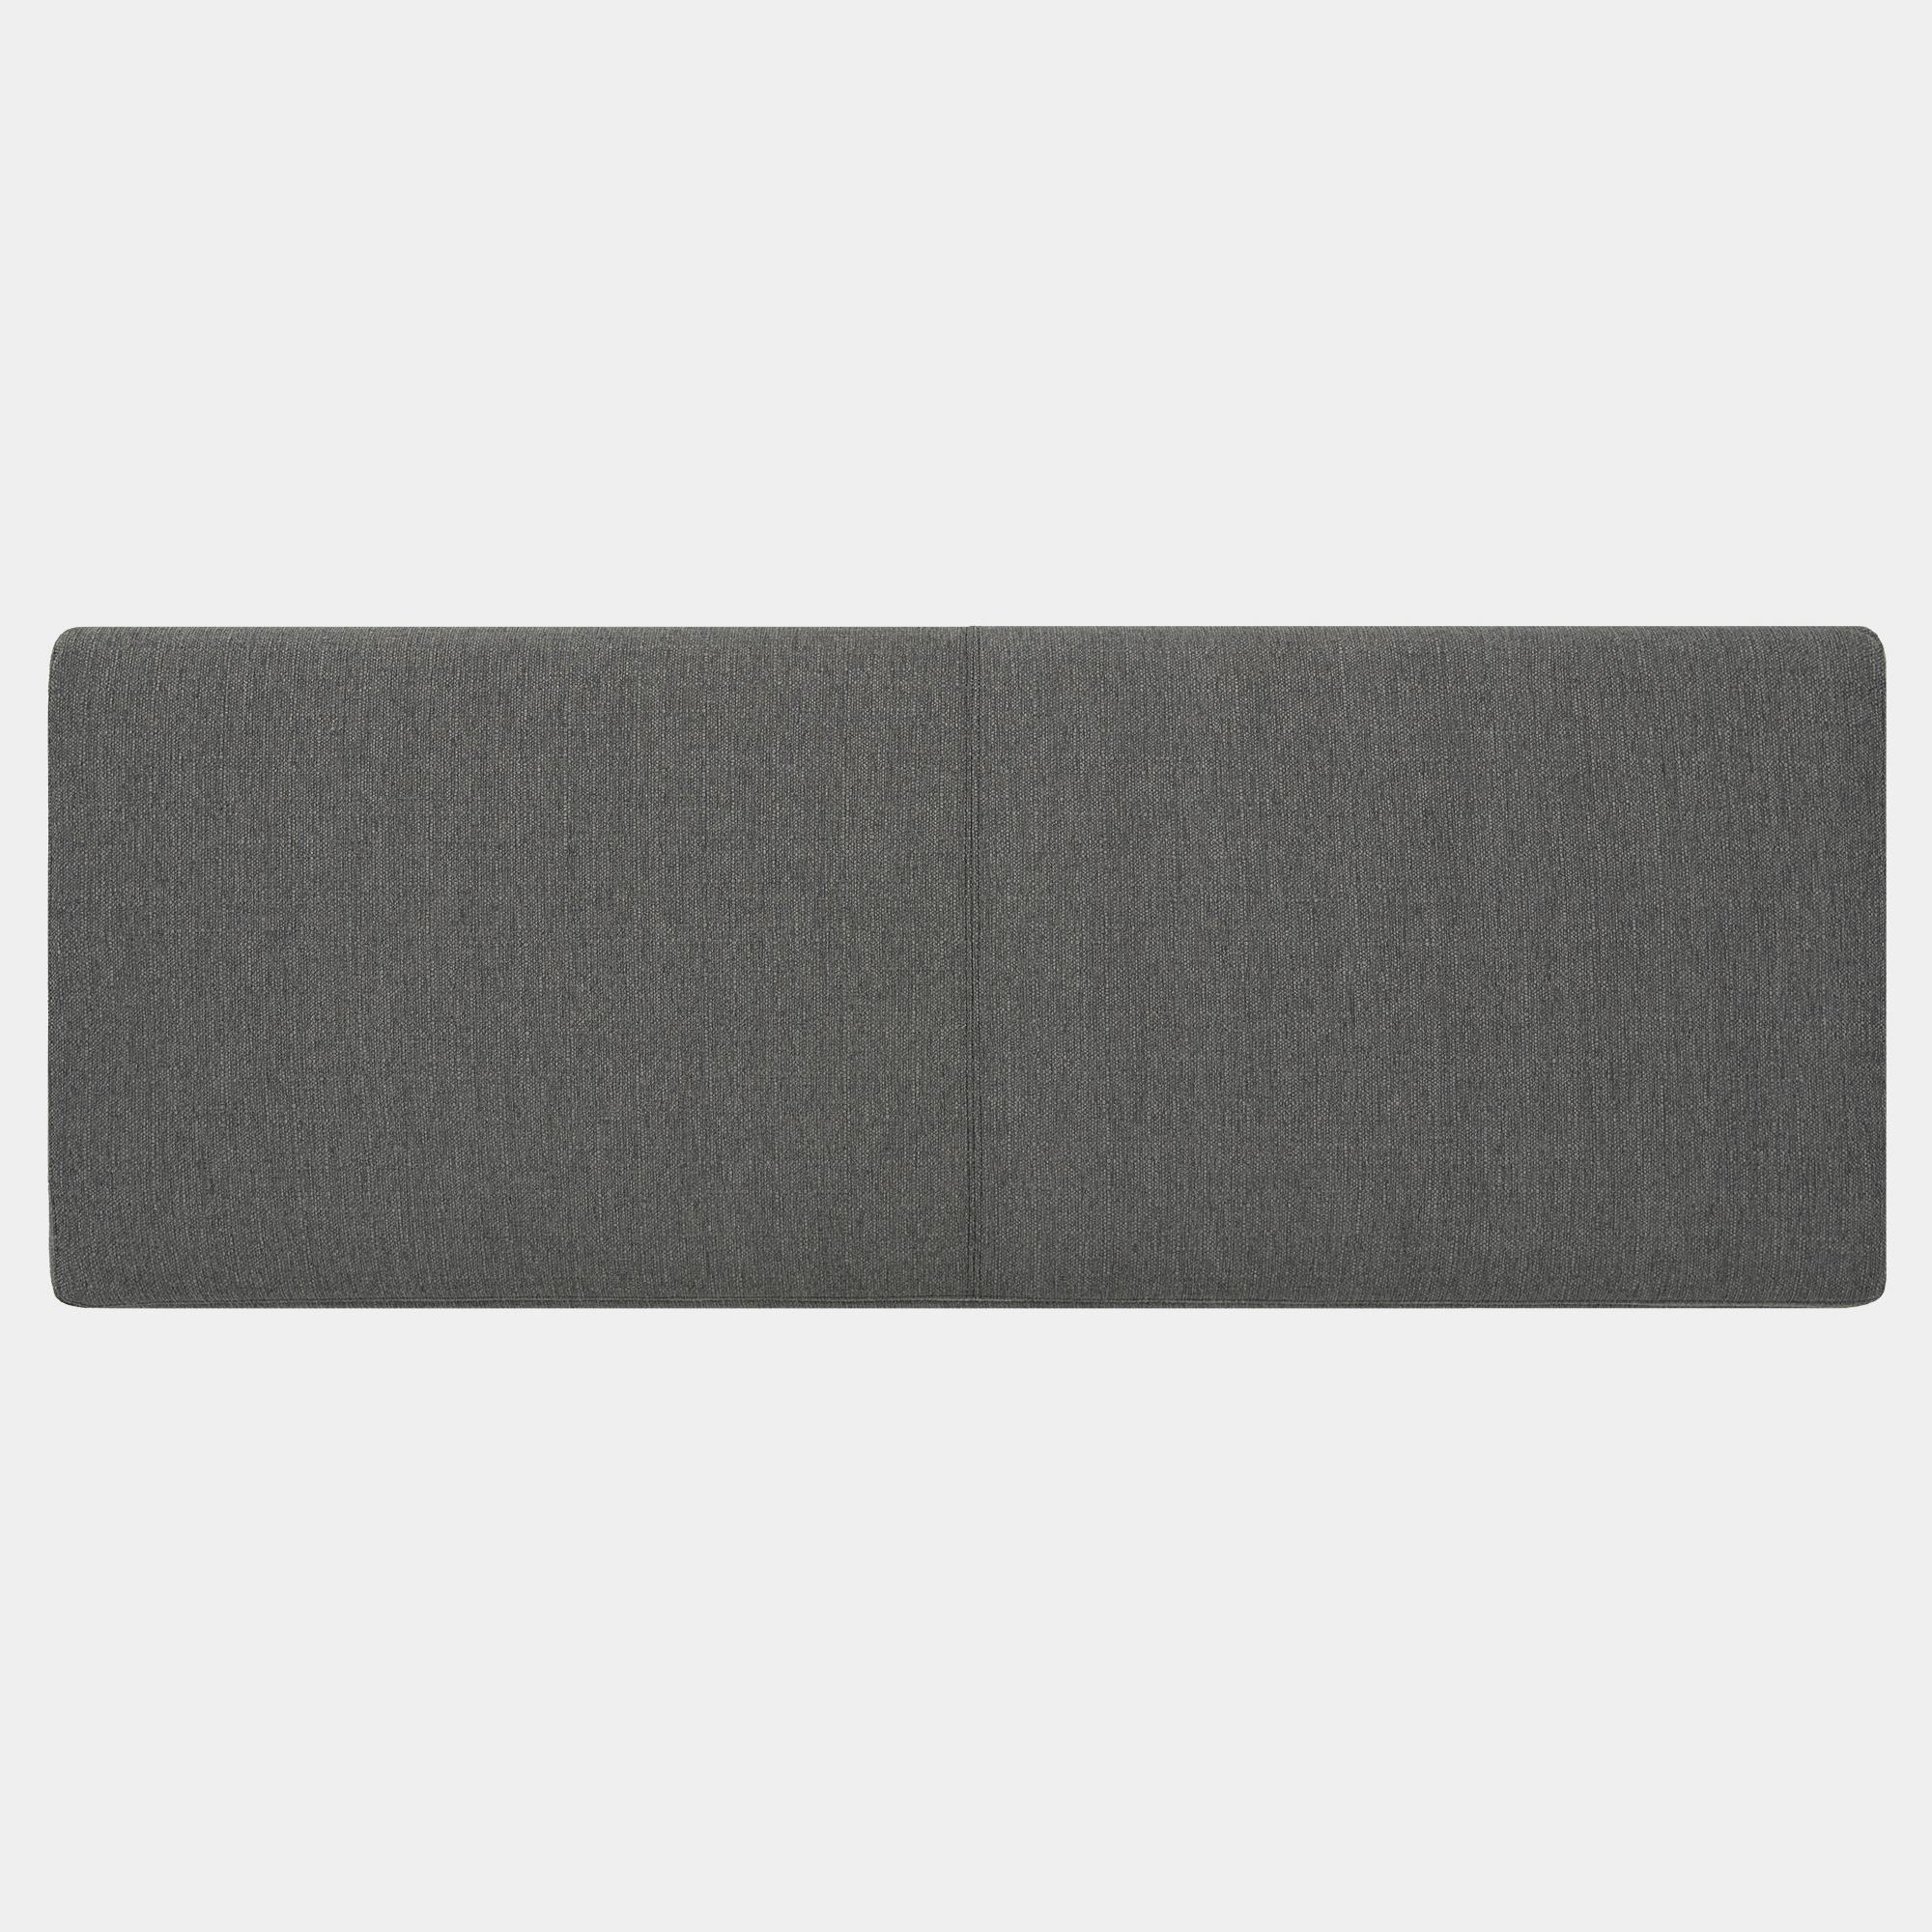 The PillowBoard (Dark Charcoal) - 1:1 - Front